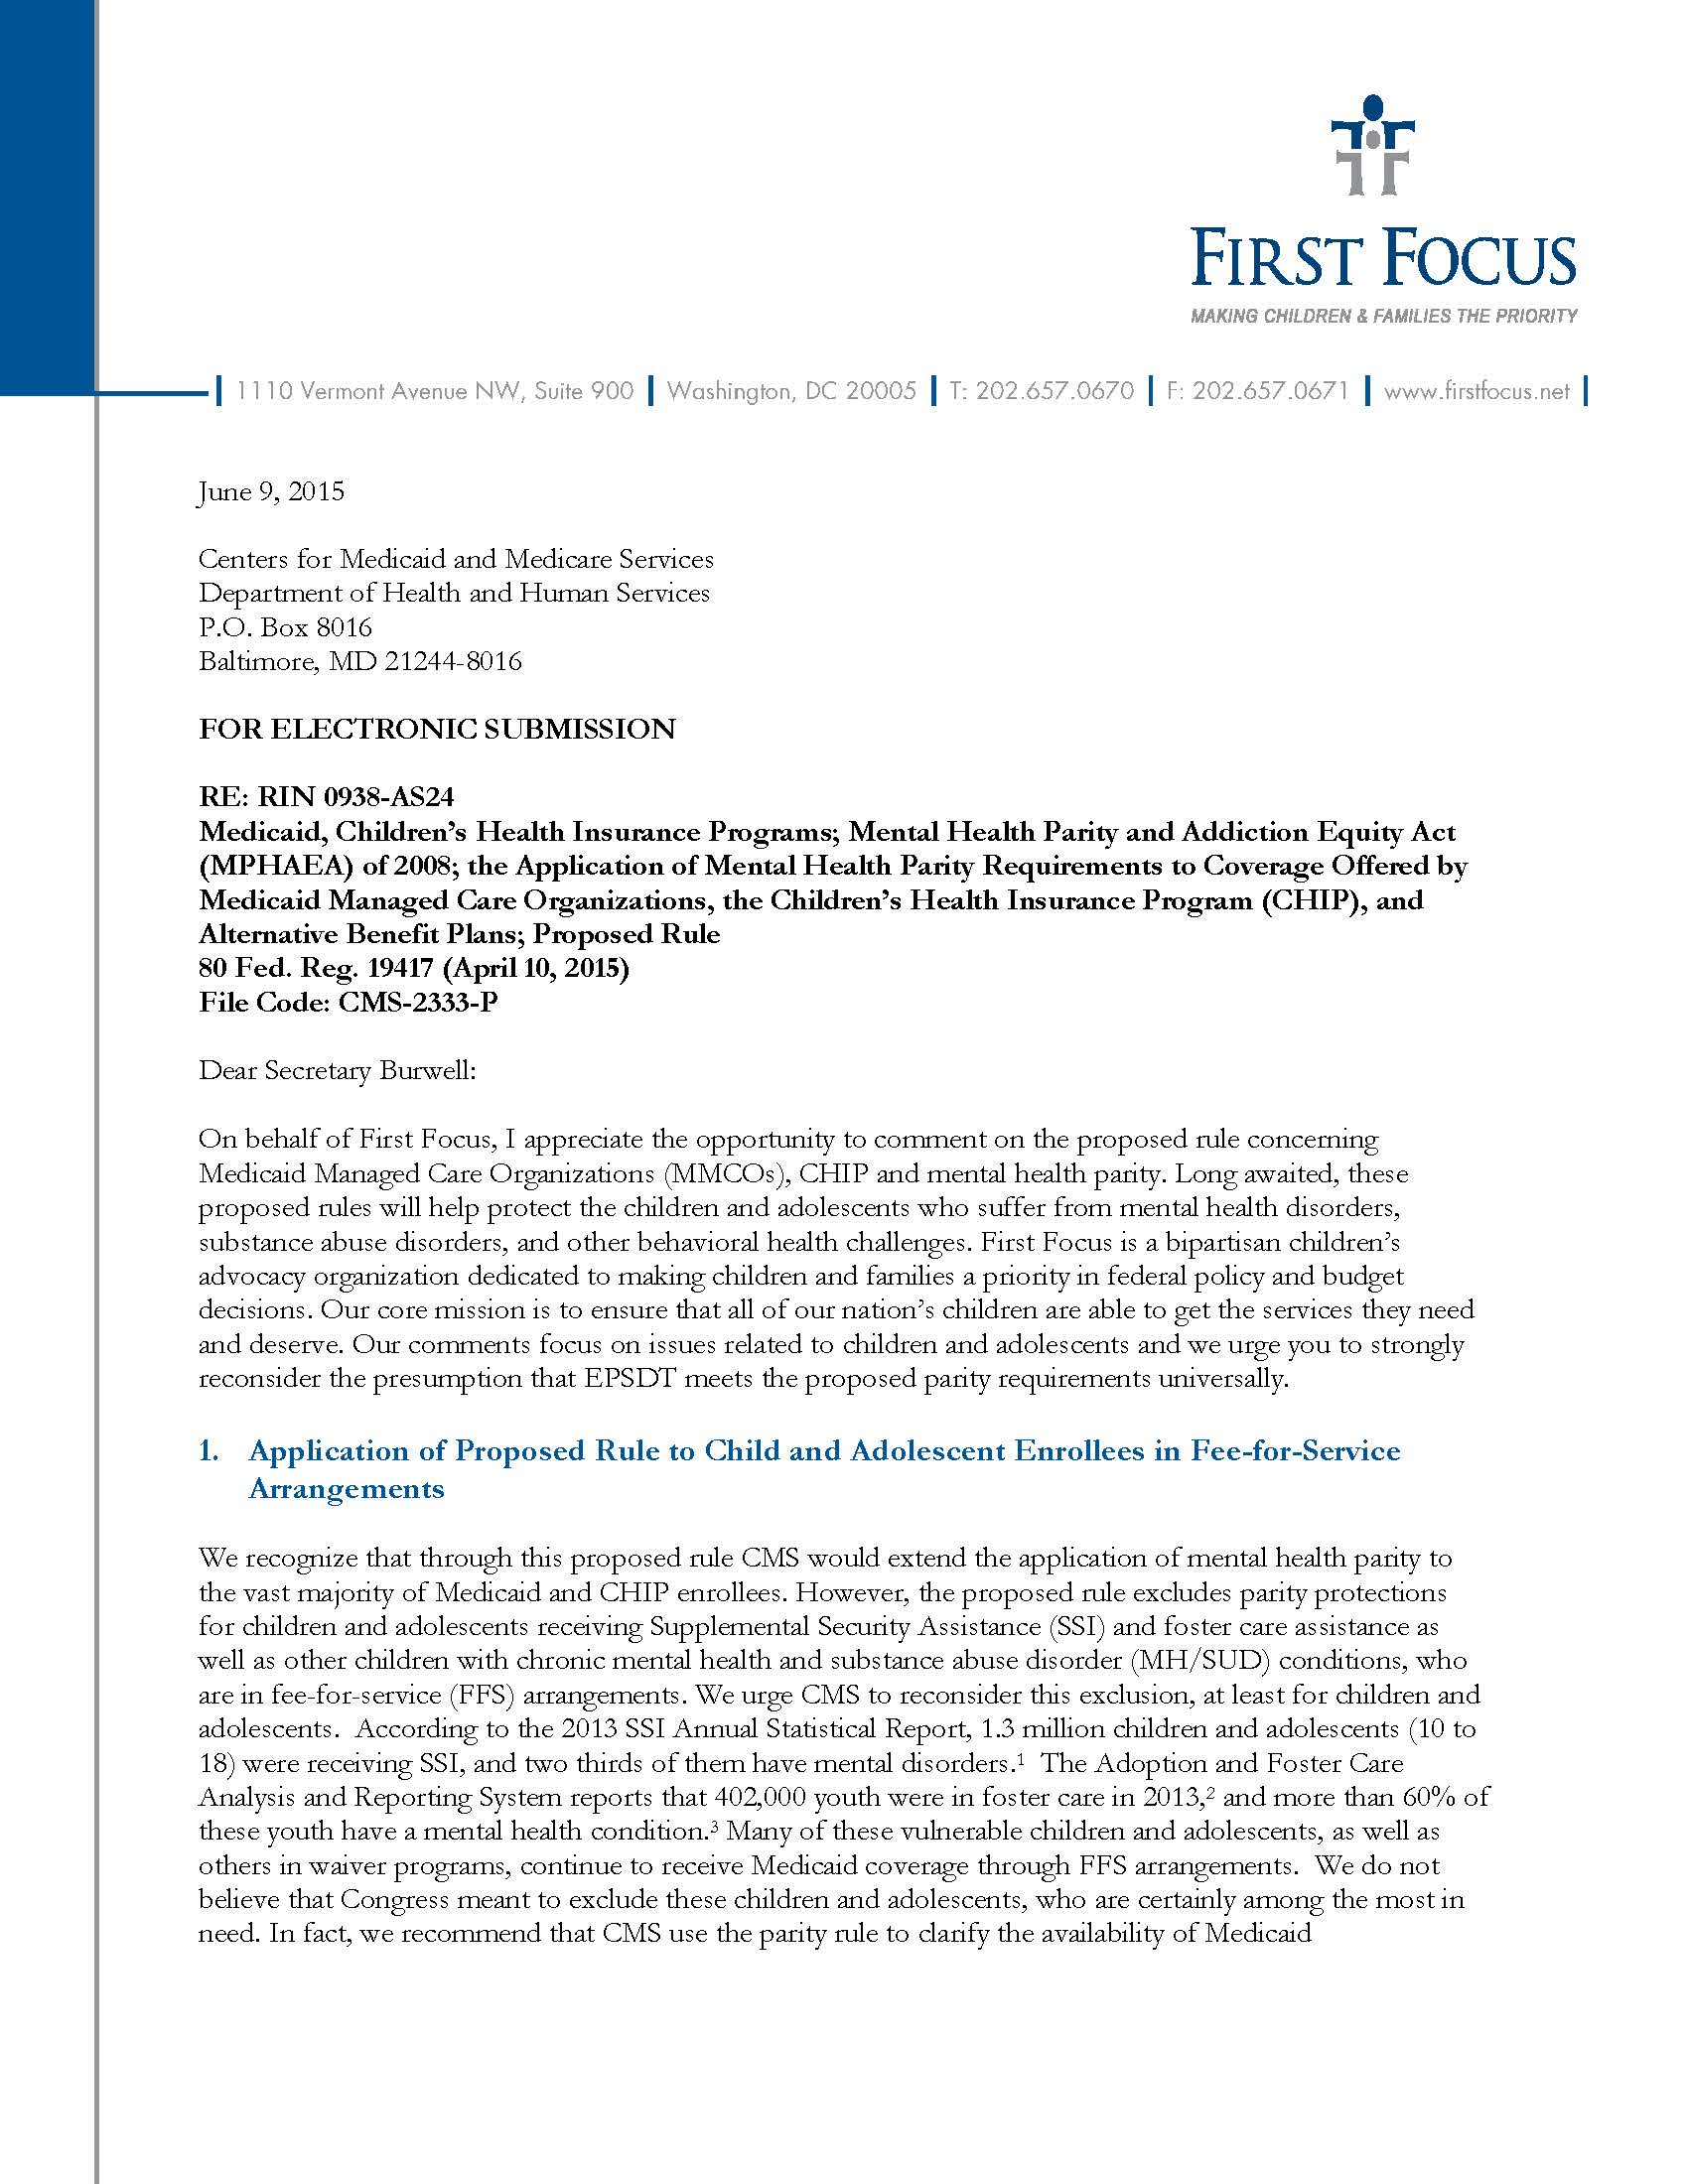 Comments on the proposed CMS rule concerning Medicaid Managed Care Organizations, CHIP, Alternative Benefit Plans, and mental health parity requirements_Page_1